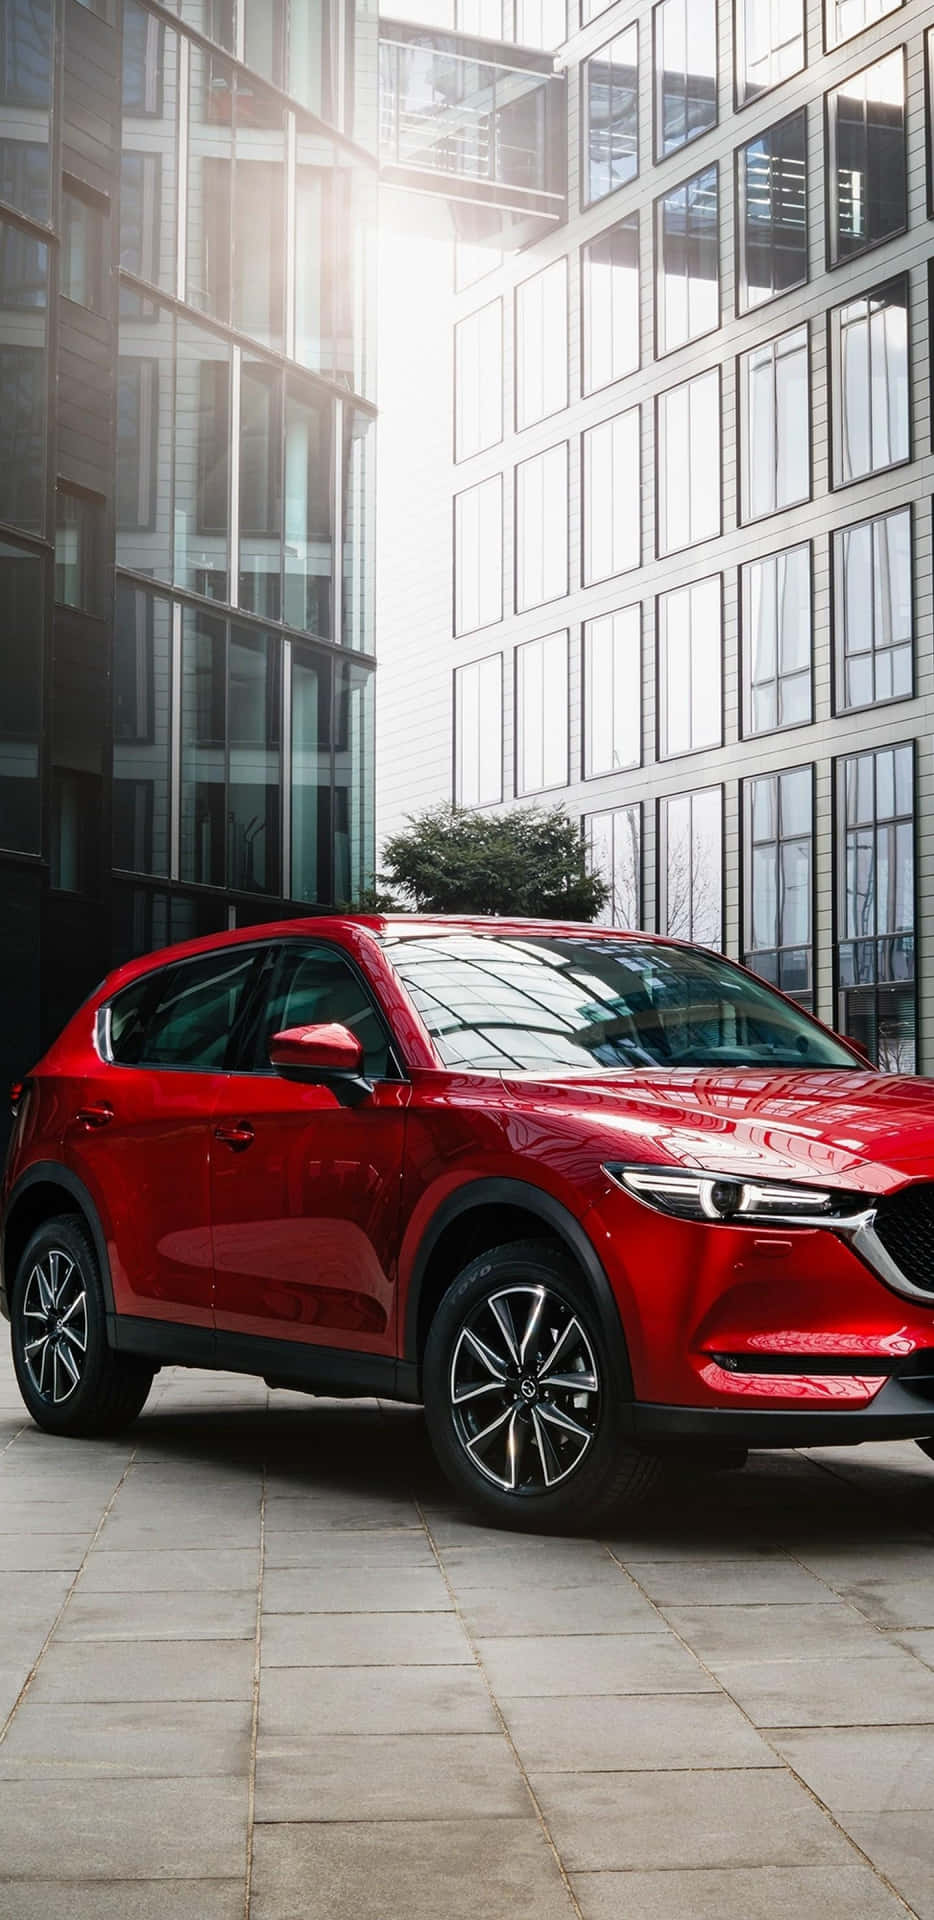 Sleek and Stylish Mazda CX-5 on the Open Road Wallpaper